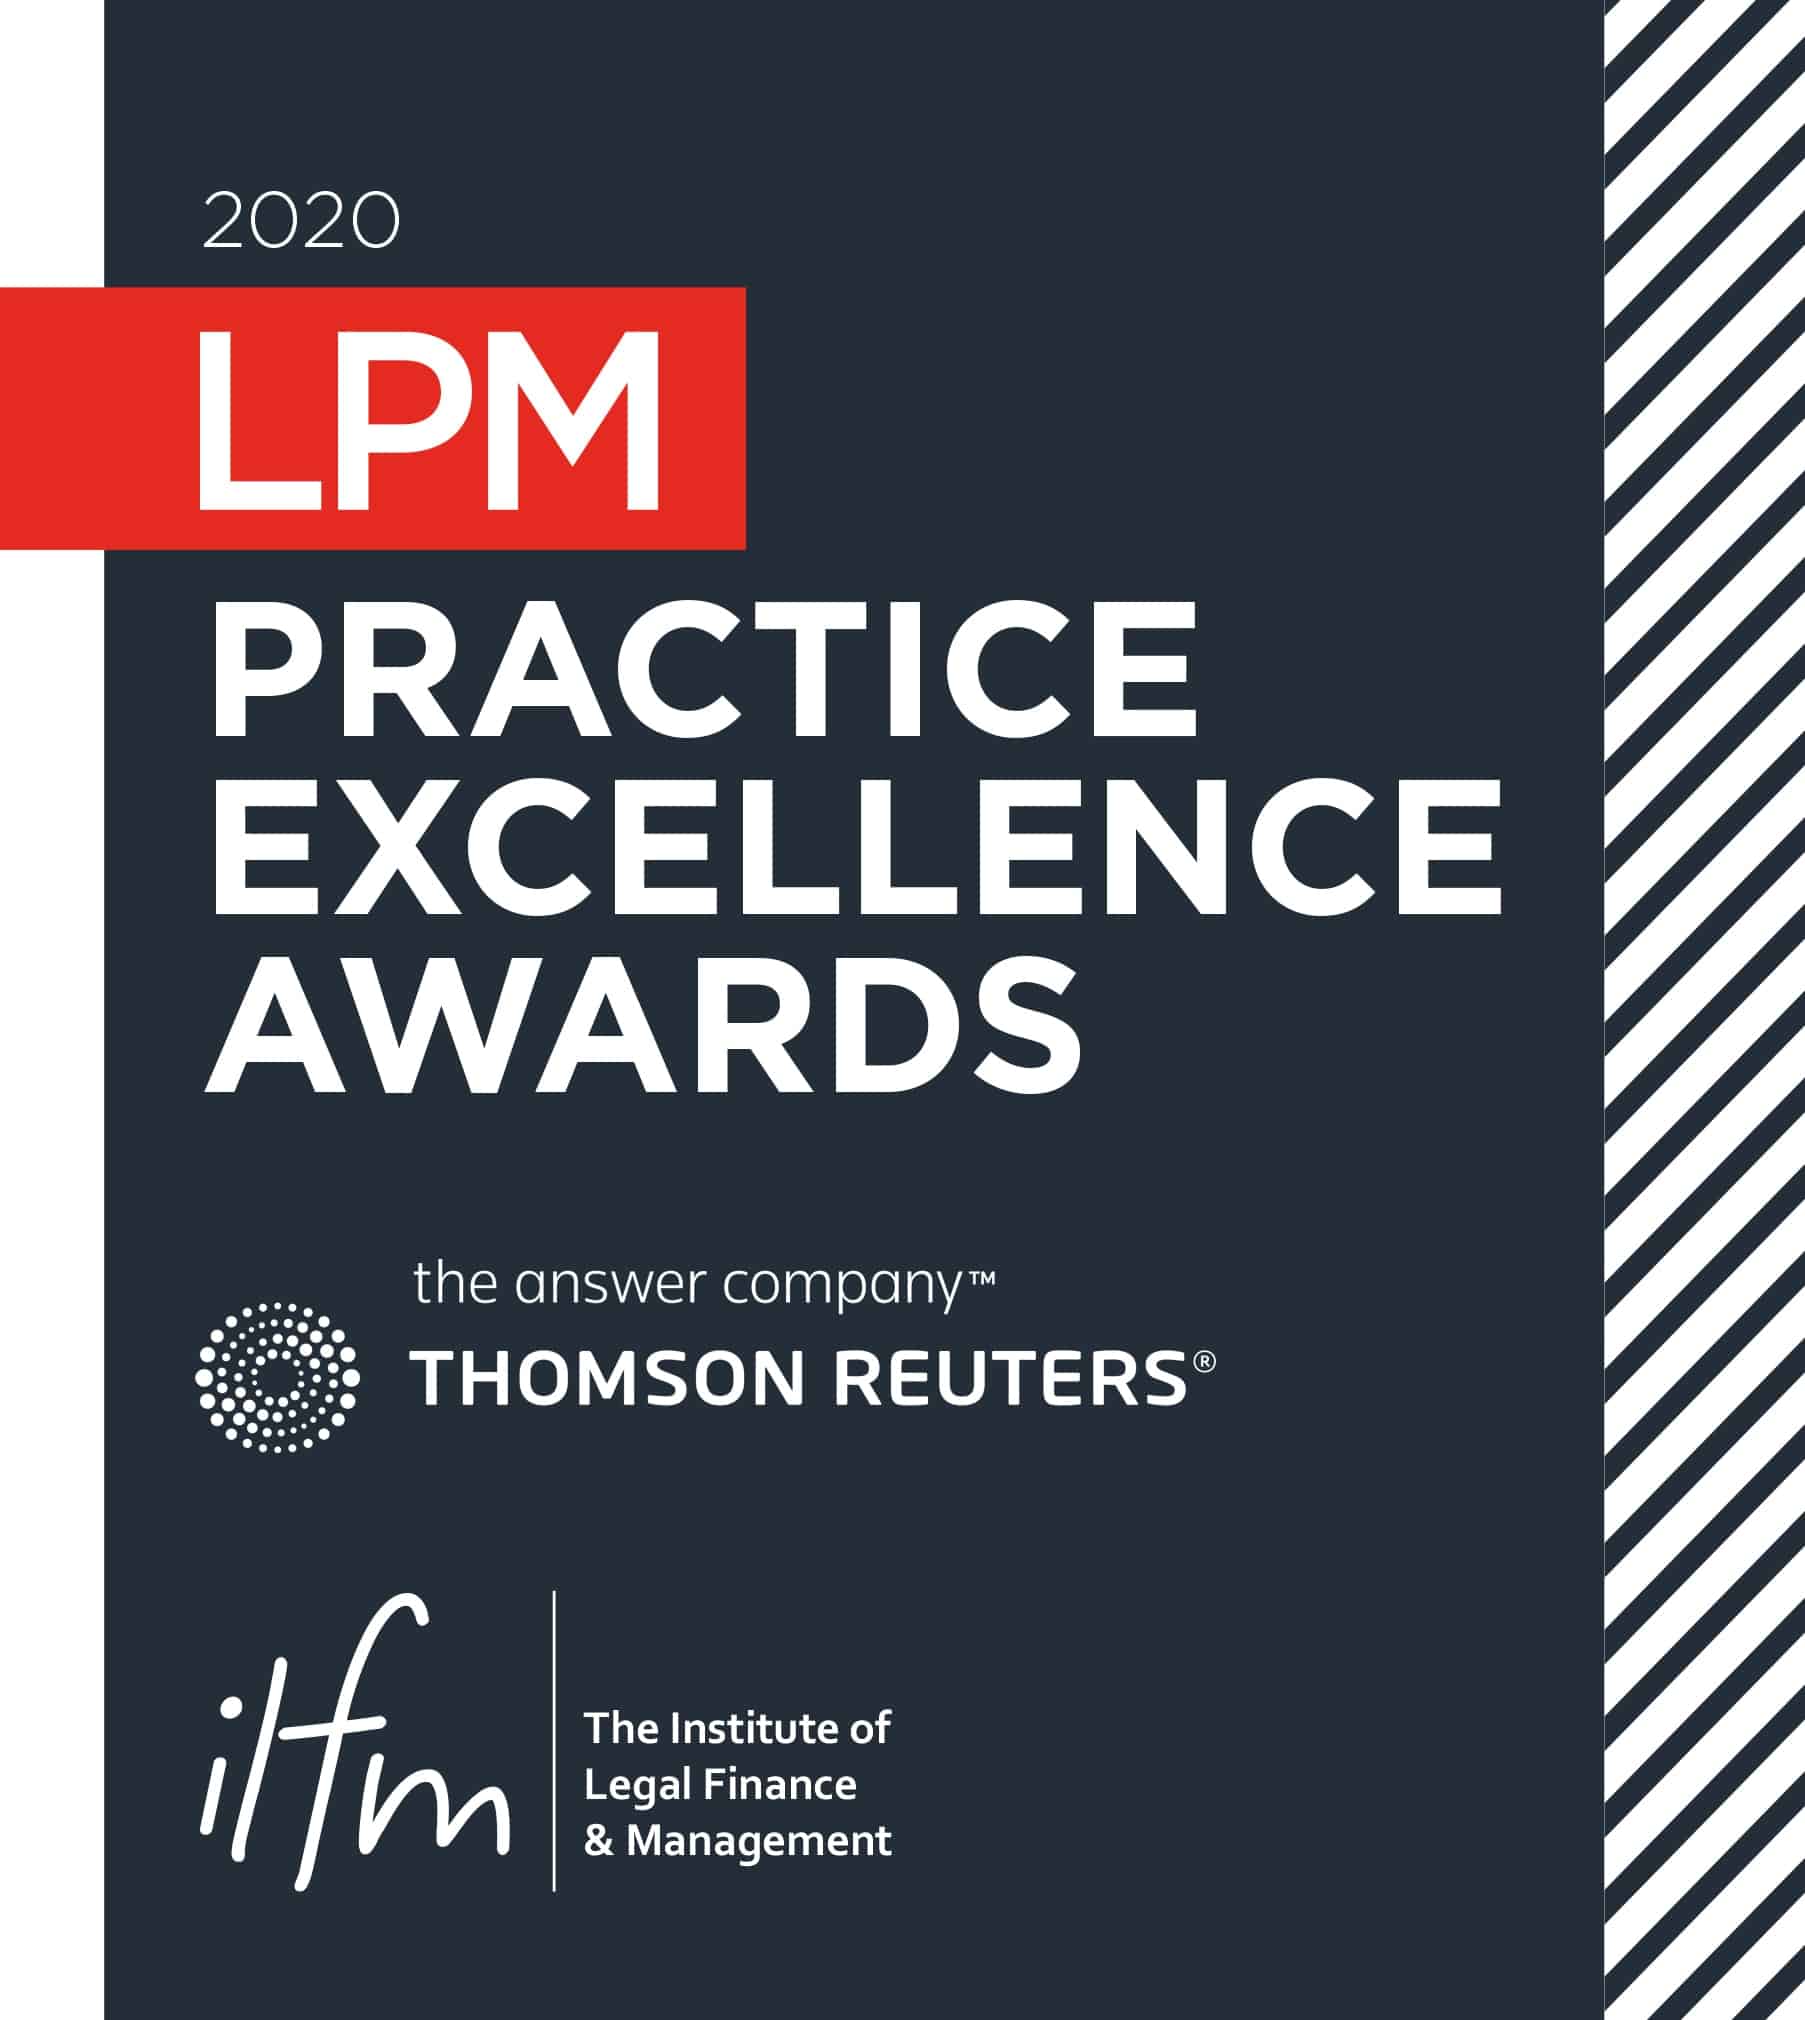 LPM Practice Excellence Awards 2020